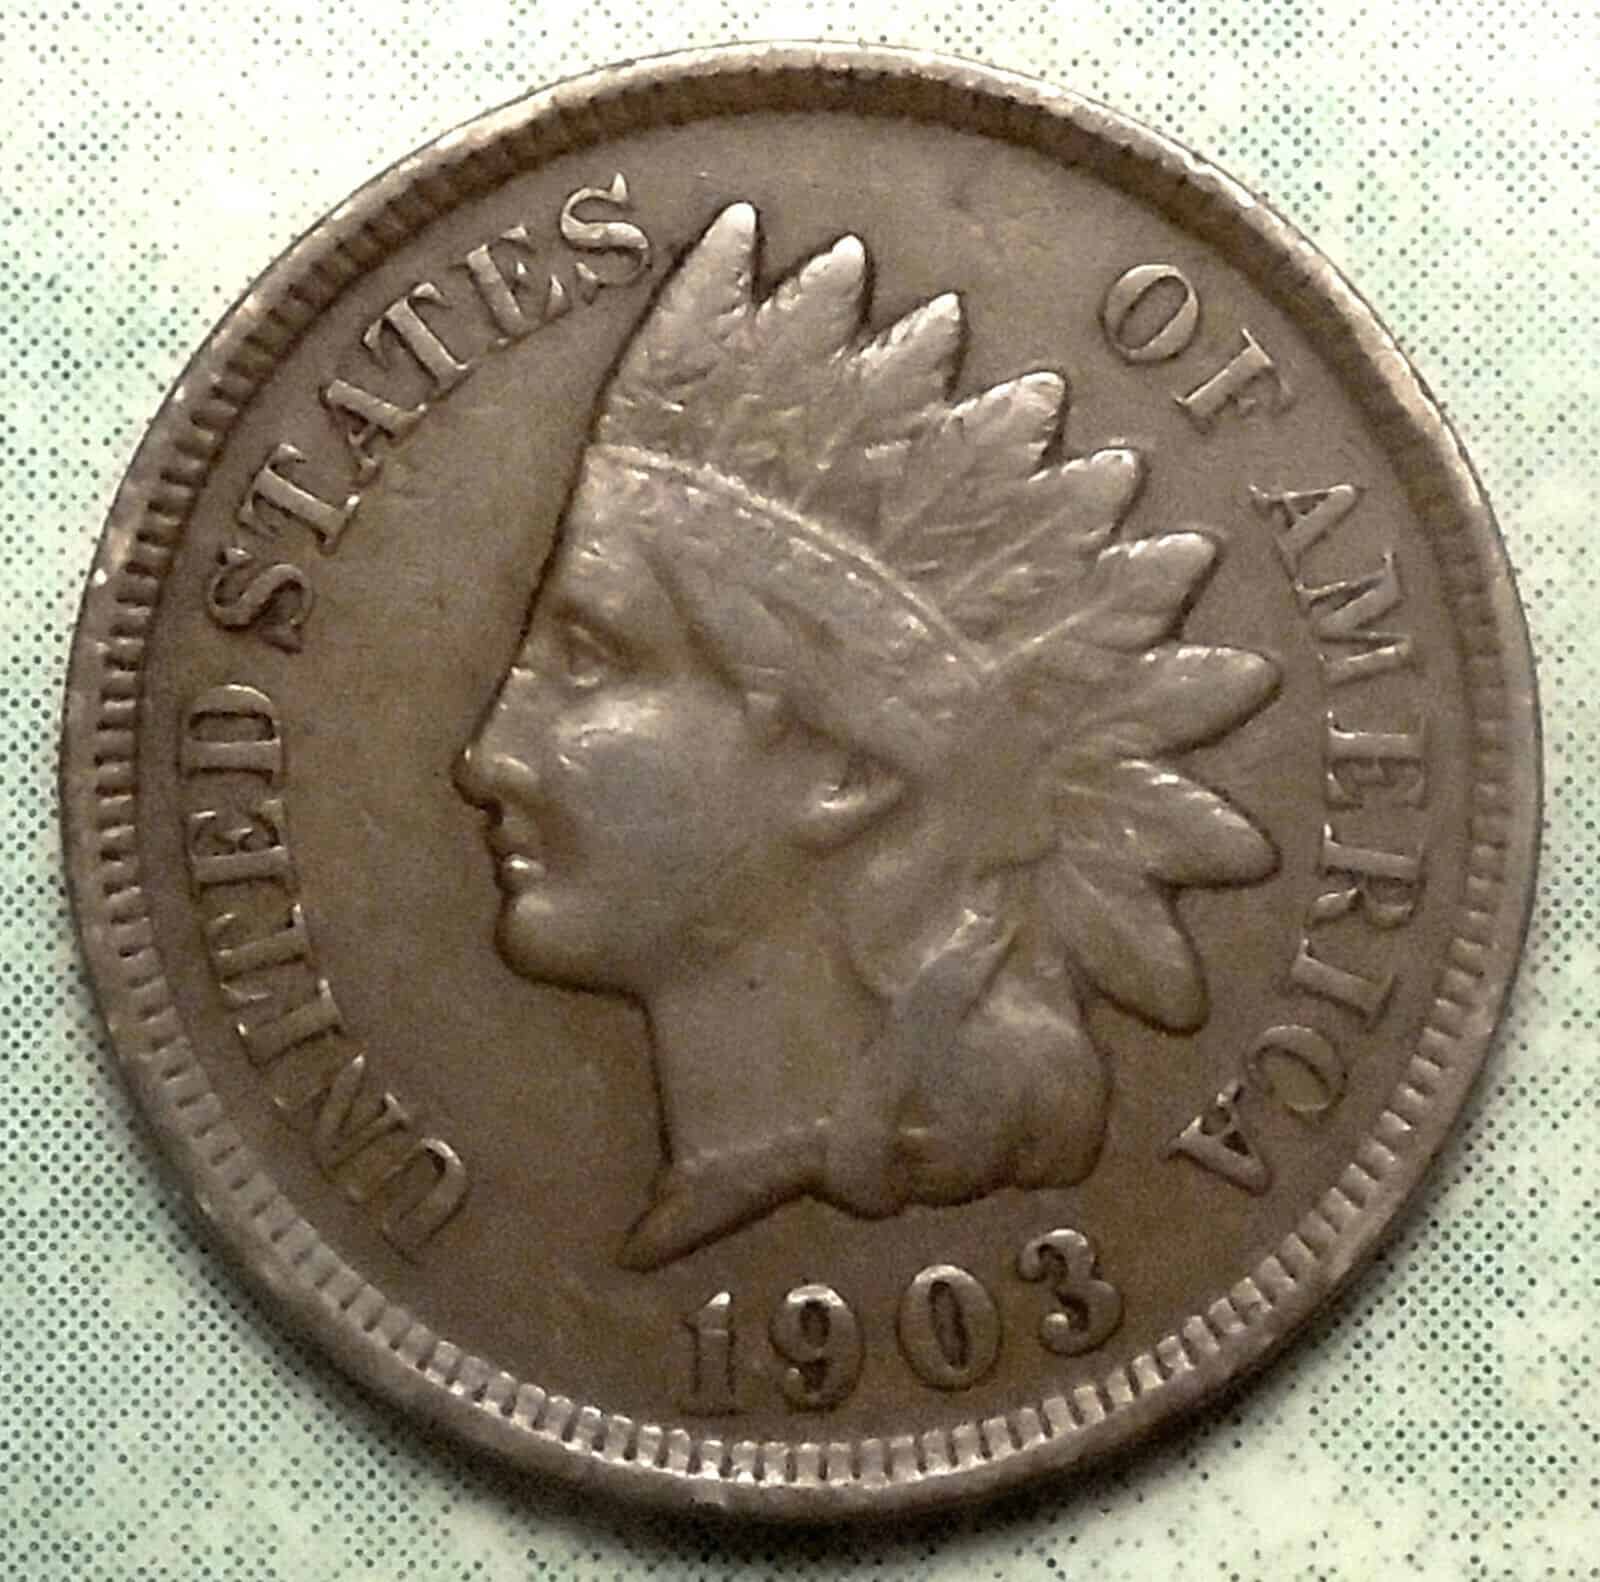  1903 (P) Brown Indian Half-Penny Value